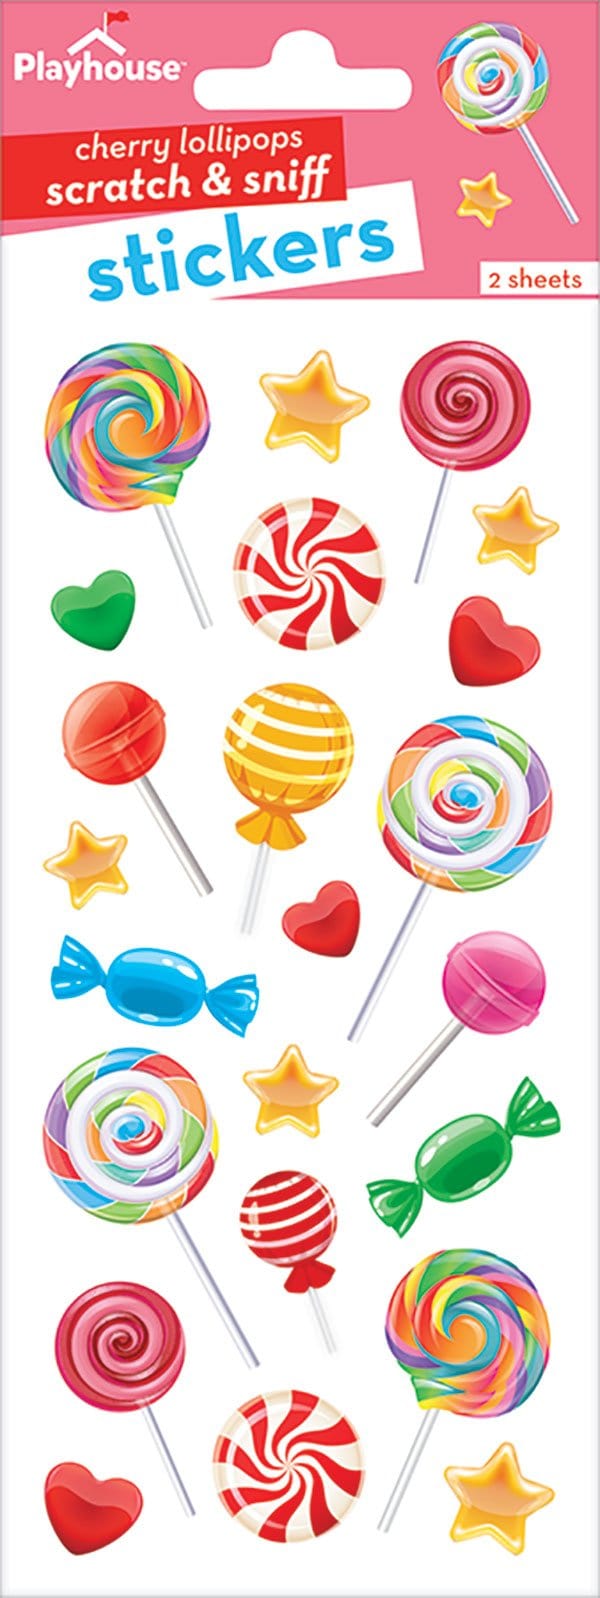 Scratch And Sniff Stickers - Lollipops Cherry